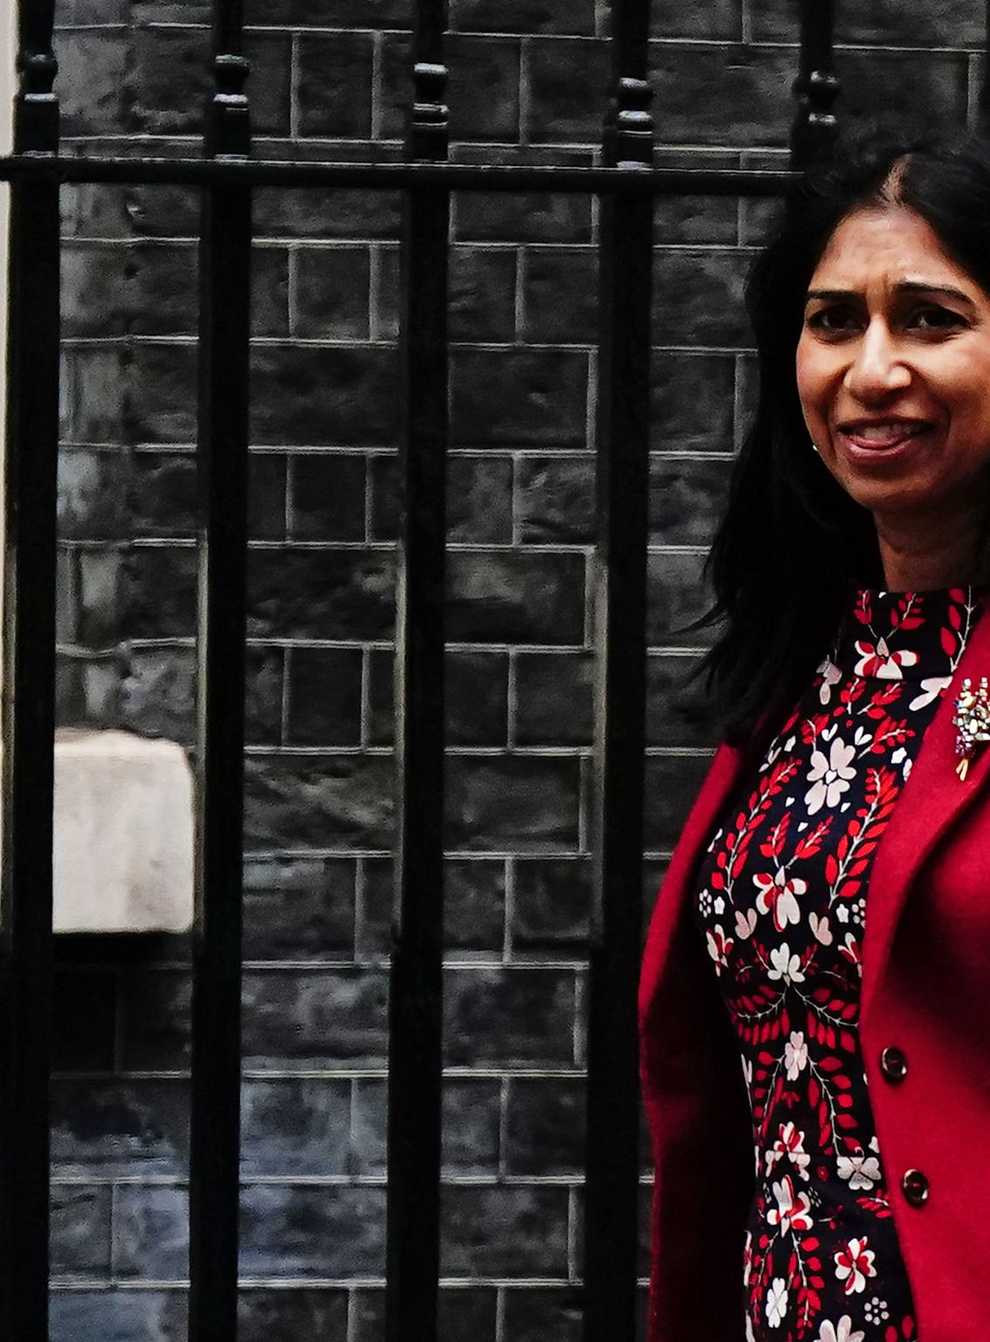 Home Secretary Suella Braverman arrives for a cabinet meeting at 10 Downing Street, London (Aaron Chown/PA)